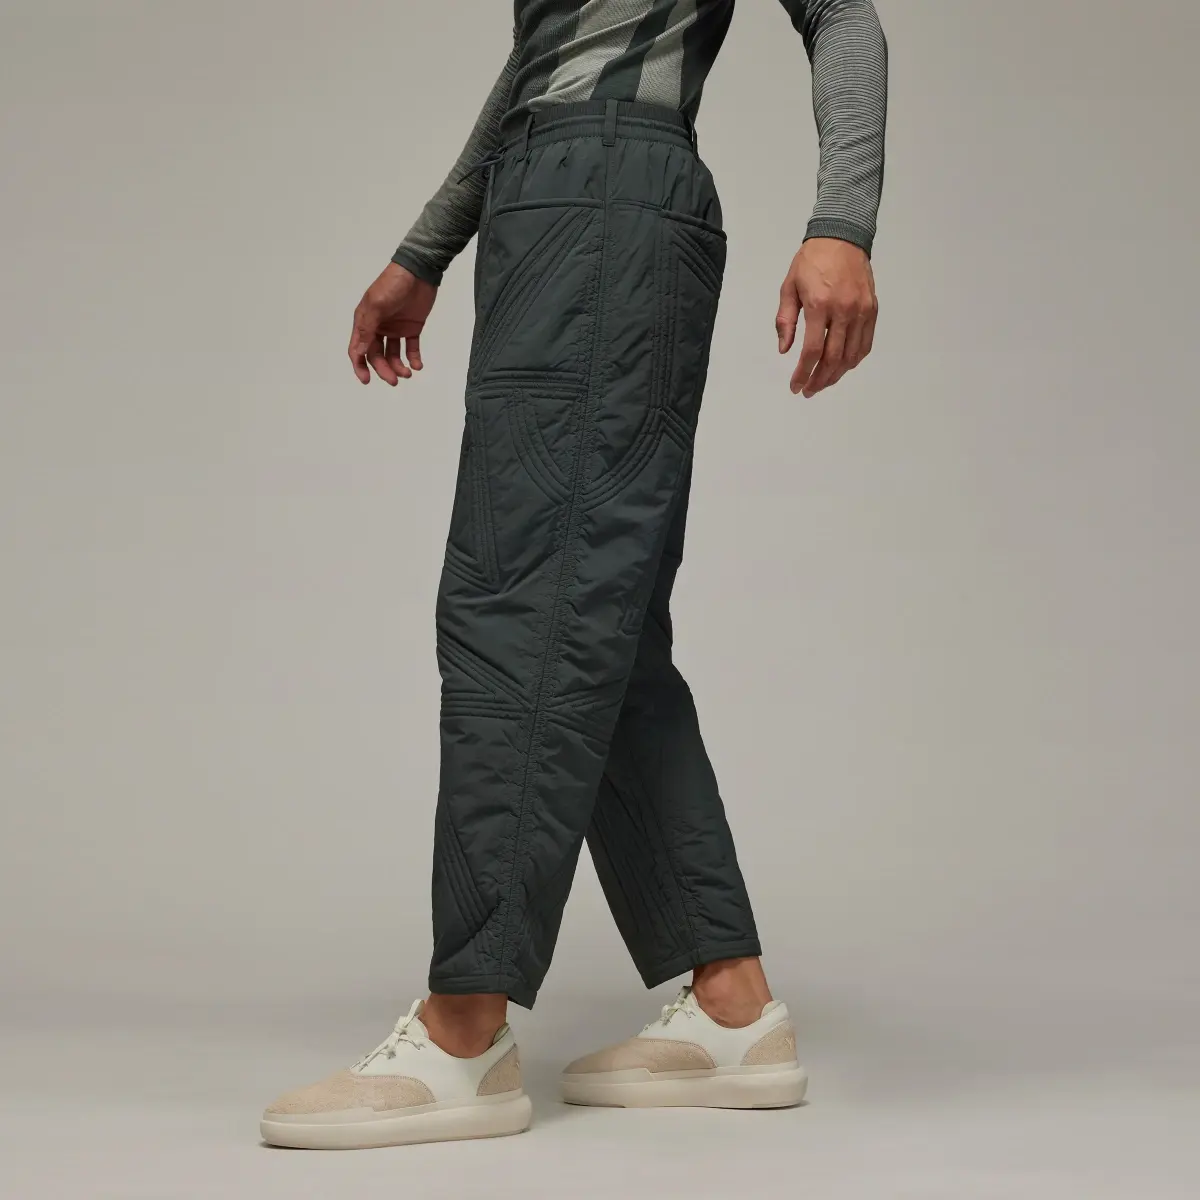 Adidas Y-3 Quilted Pants. 2